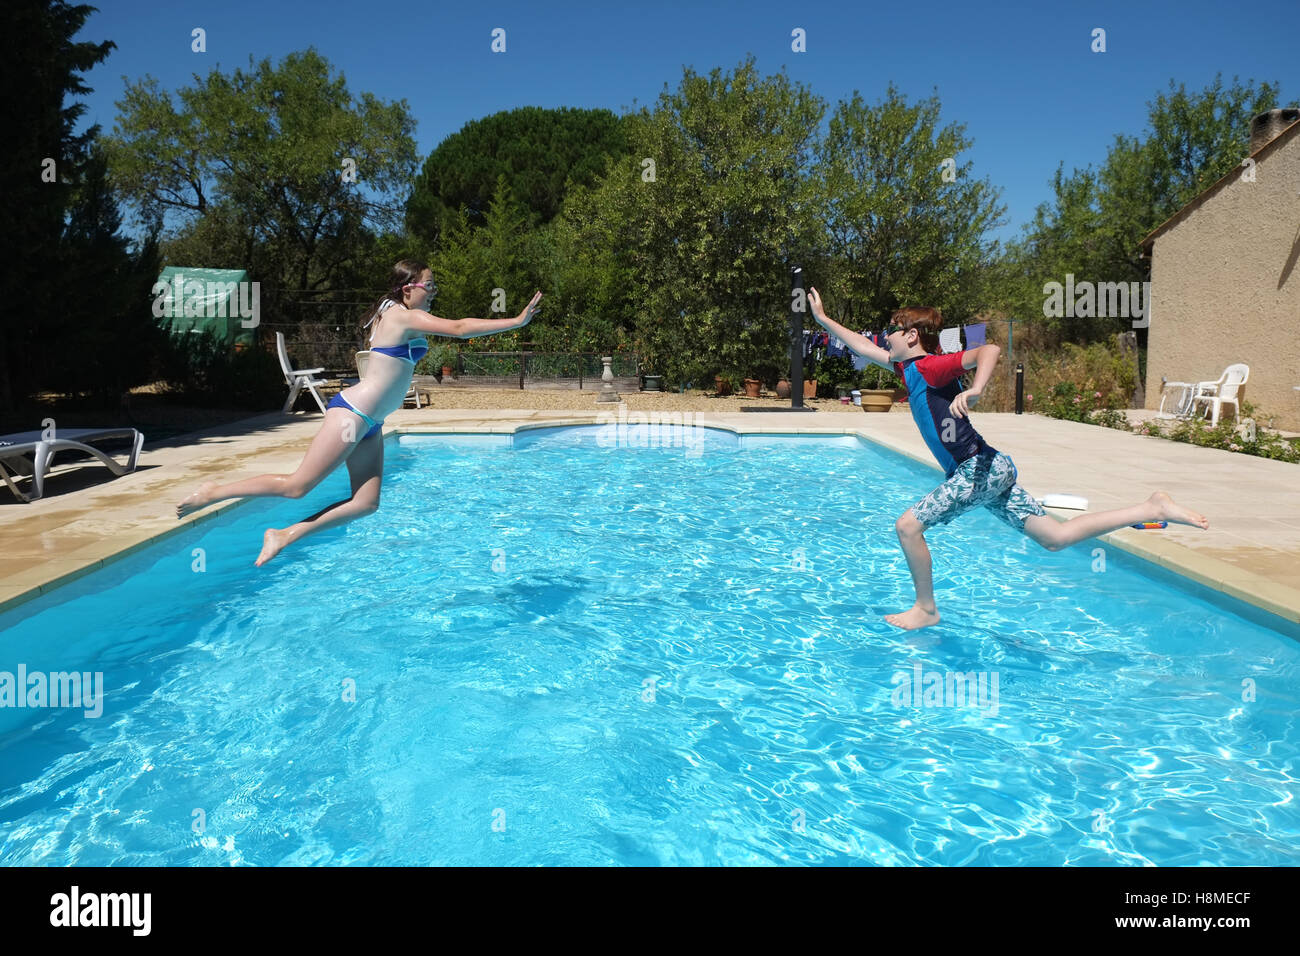 two children jump towards each other trying to touch hands in a swimming pool laughing and having fun Stock Photo